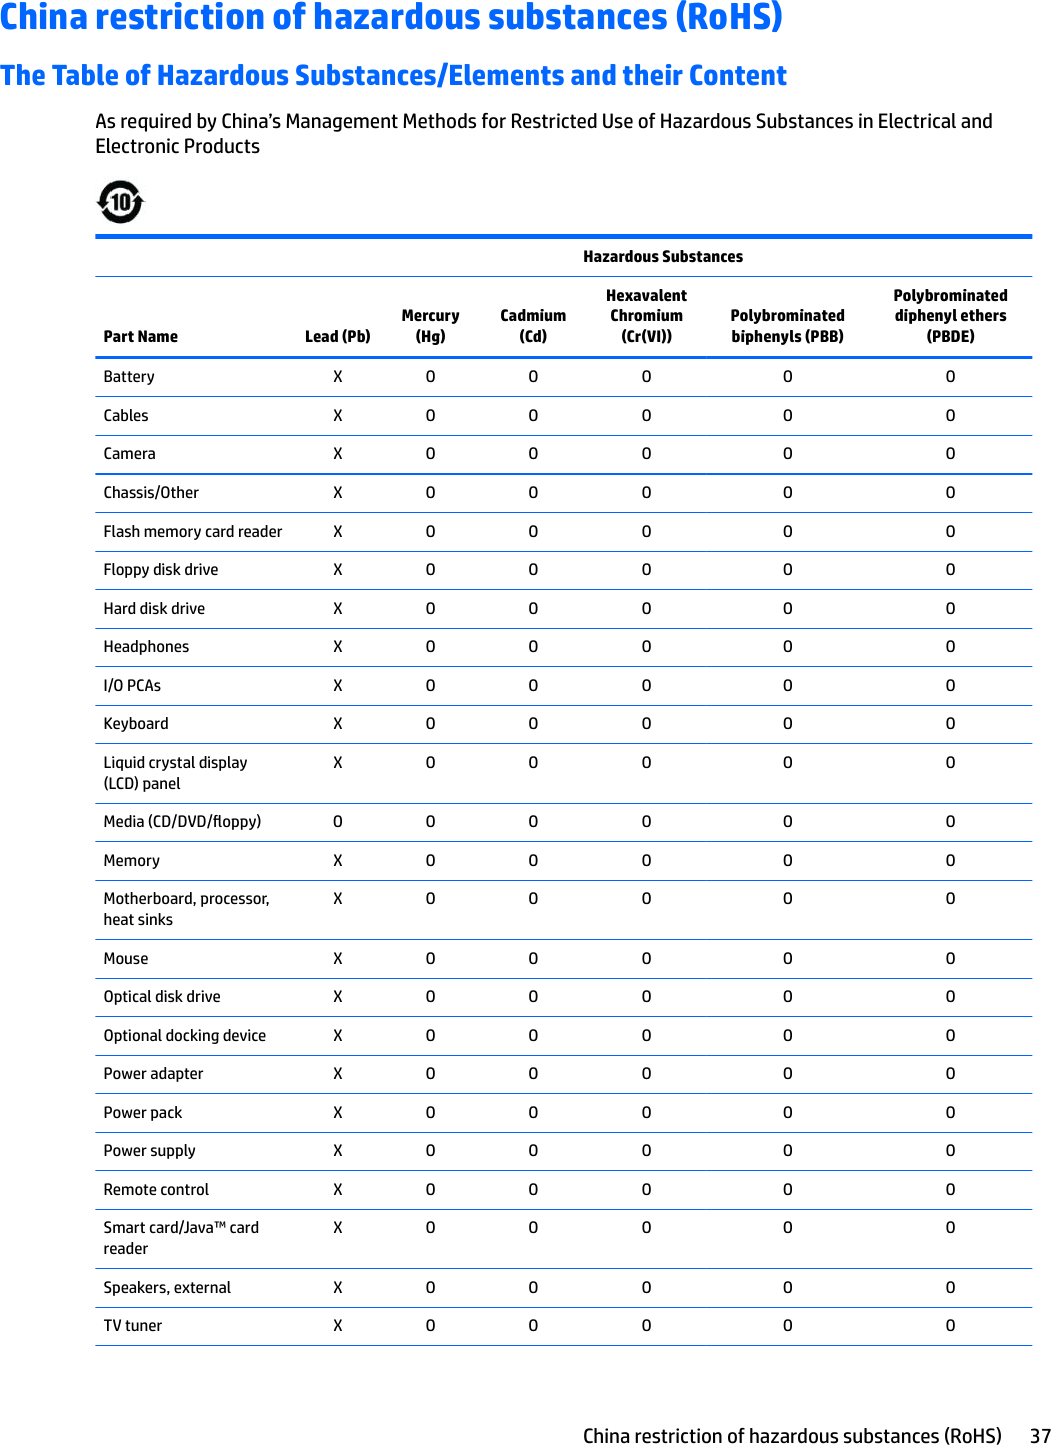 China restriction of hazardous substances (RoHS)The Table of Hazardous Substances/Elements and their ContentAs required by China’s Management Methods for Restricted Use of Hazardous Substances in Electrical and Electronic Products  Hazardous SubstancesPart Name Lead (Pb)Mercury (Hg)Cadmium (Cd)Hexavalent Chromium (Cr(VI))Polybrominated biphenyls (PBB)Polybrominated diphenyl ethers (PBDE)Battery X O O O O OCables X O O O O OCamera X O O O O OChassis/Other X O O O O OFlash memory card reader X O O O O OFloppy disk drive X O O O O OHard disk drive X O O O O OHeadphones X O O O O OI/O PCAs X O O O O OKeyboard X O O O O OLiquid crystal display (LCD) panelX O O O O OMedia (CD/DVD/oppy) O O O O O OMemory X O O O O OMotherboard, processor, heat sinksX O O O O OMouse X O O O O OOptical disk drive X O O O O OOptional docking device X O O O O OPower adapter X O O O O OPower pack X O O O O OPower supply X O O O O ORemote control X O O O O OSmart card/Java™ card readerX O O O O OSpeakers, external X O O O O OTV tuner X O O O O OChina restriction of hazardous substances (RoHS) 37